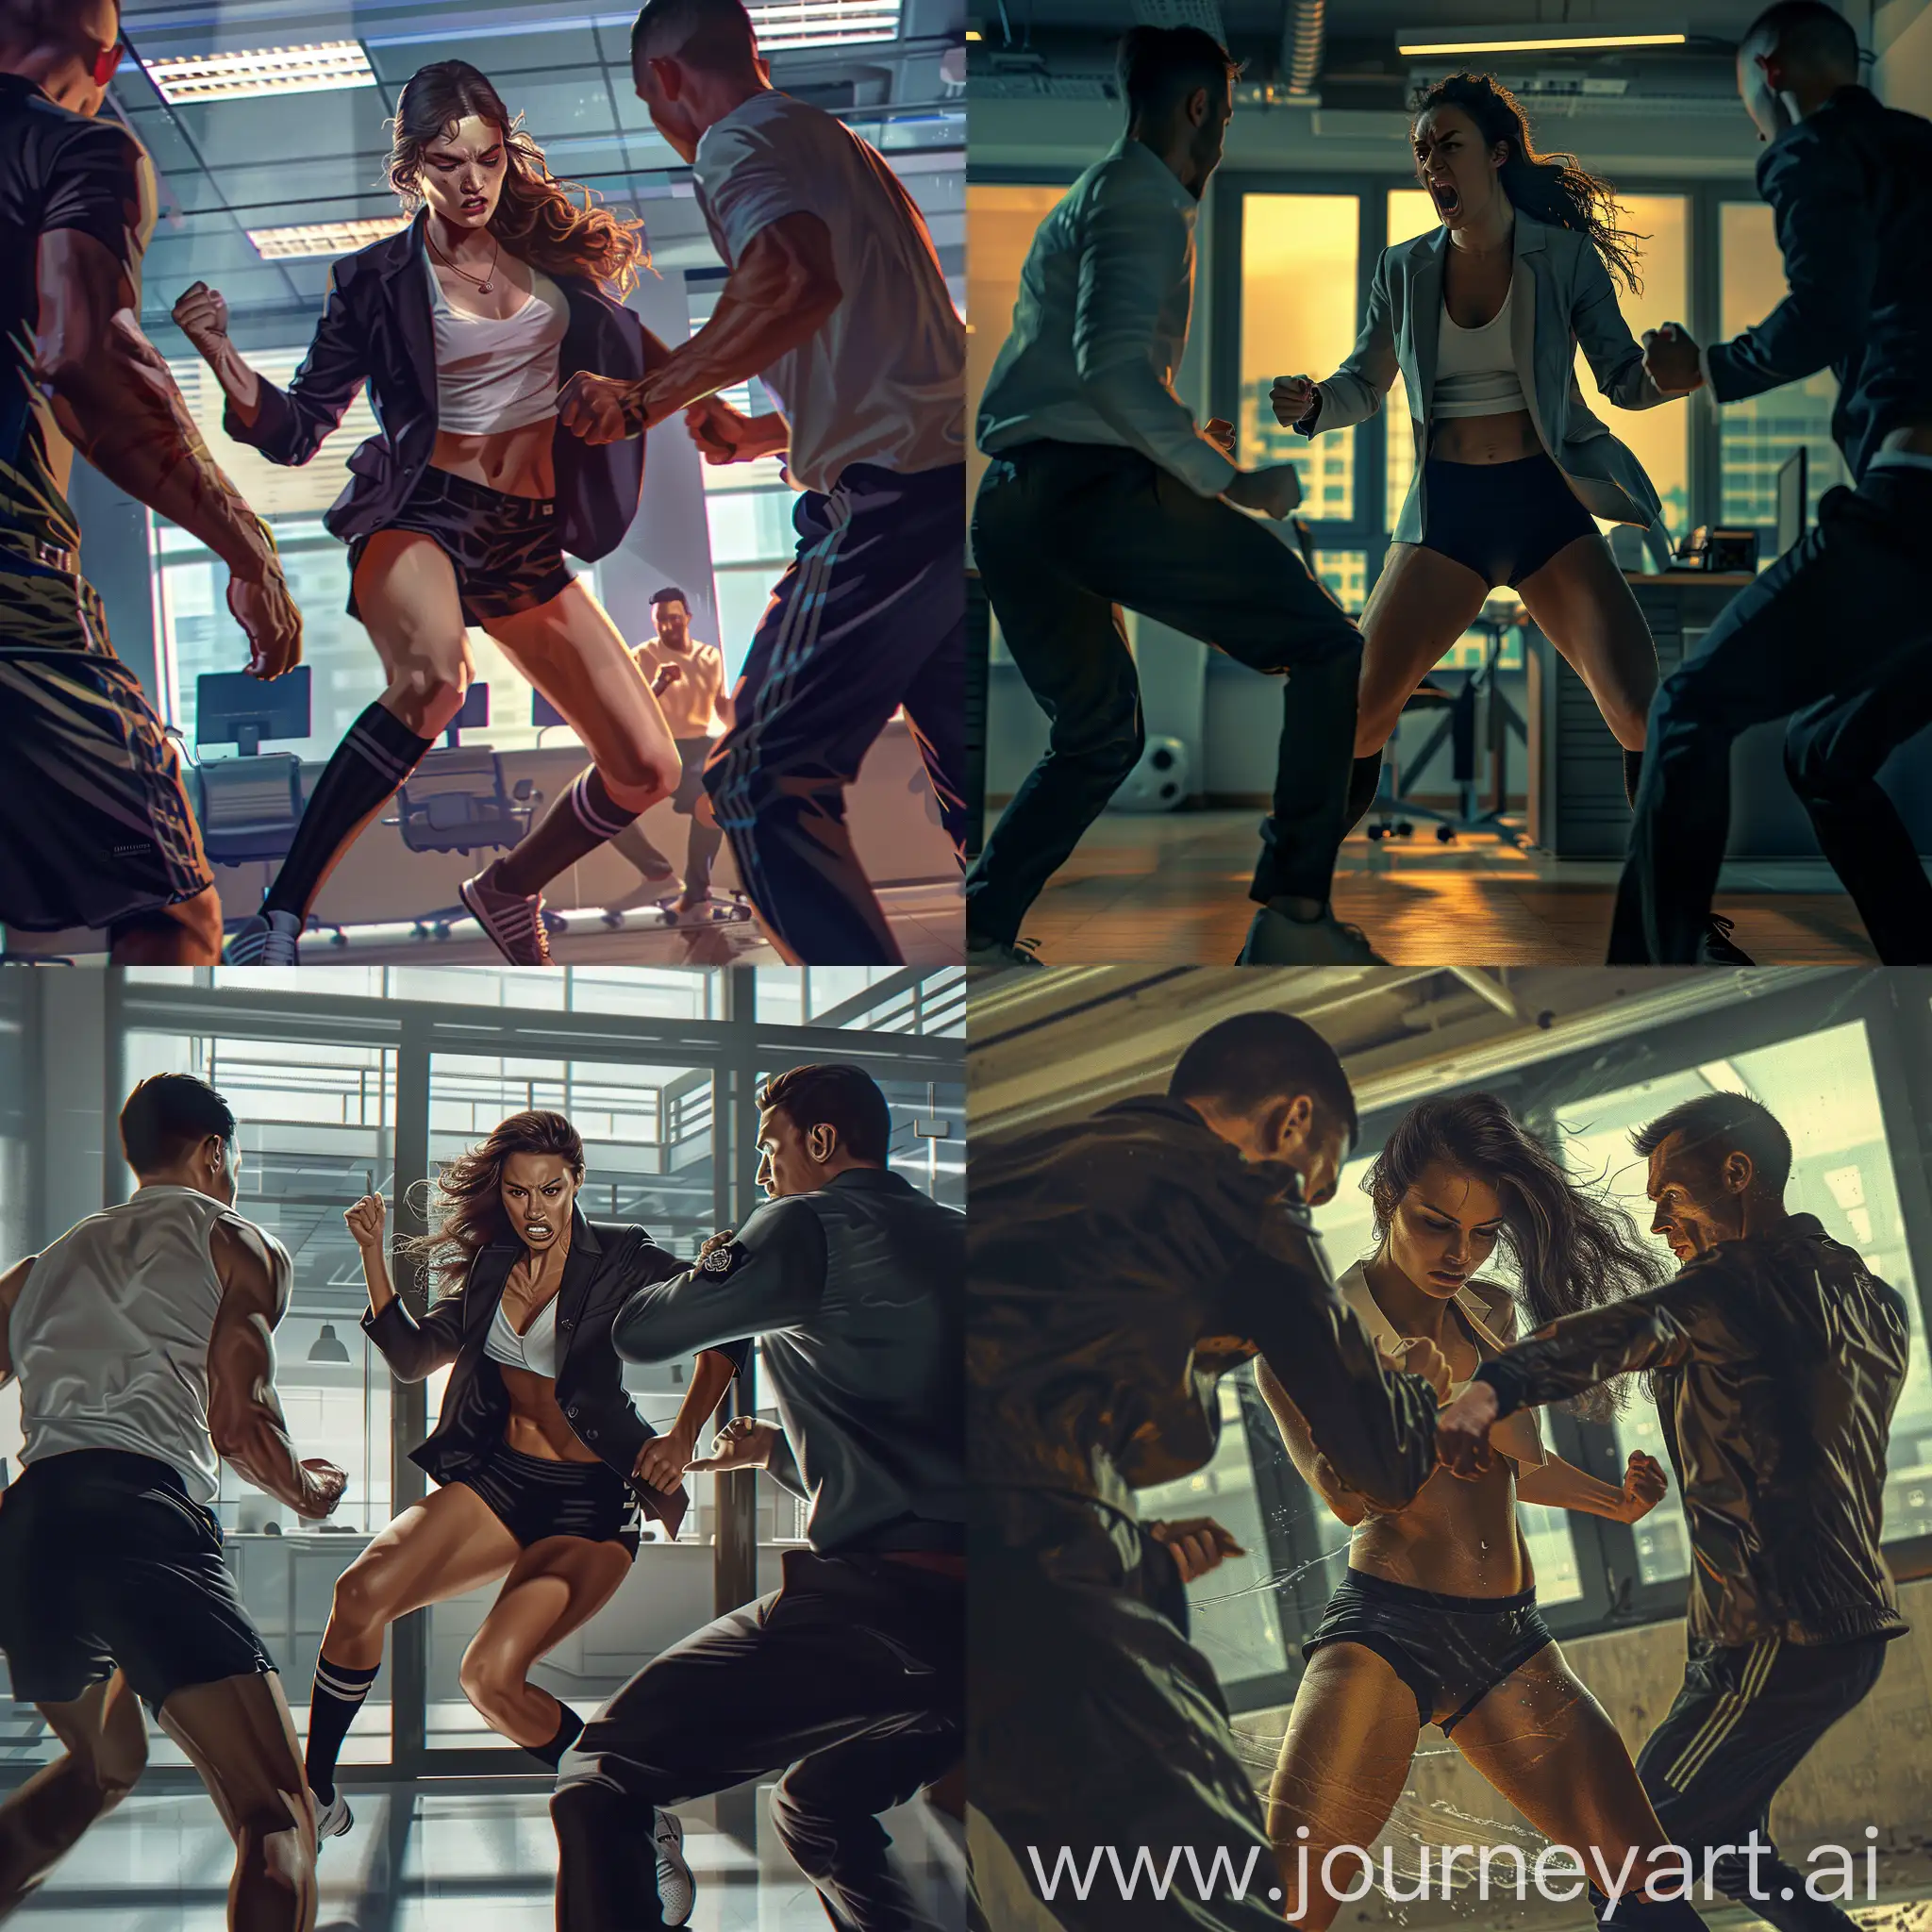 IT company office, reception zone. A young muscular woman in (formal suit jacket, black shorts, adidas black overknee socks) attacked by two male in sport clothing, sport pants. The woman is struggling and trying to defend herself but is clearly outmatched. Realistic style, dramatic lighting, intense action scene.